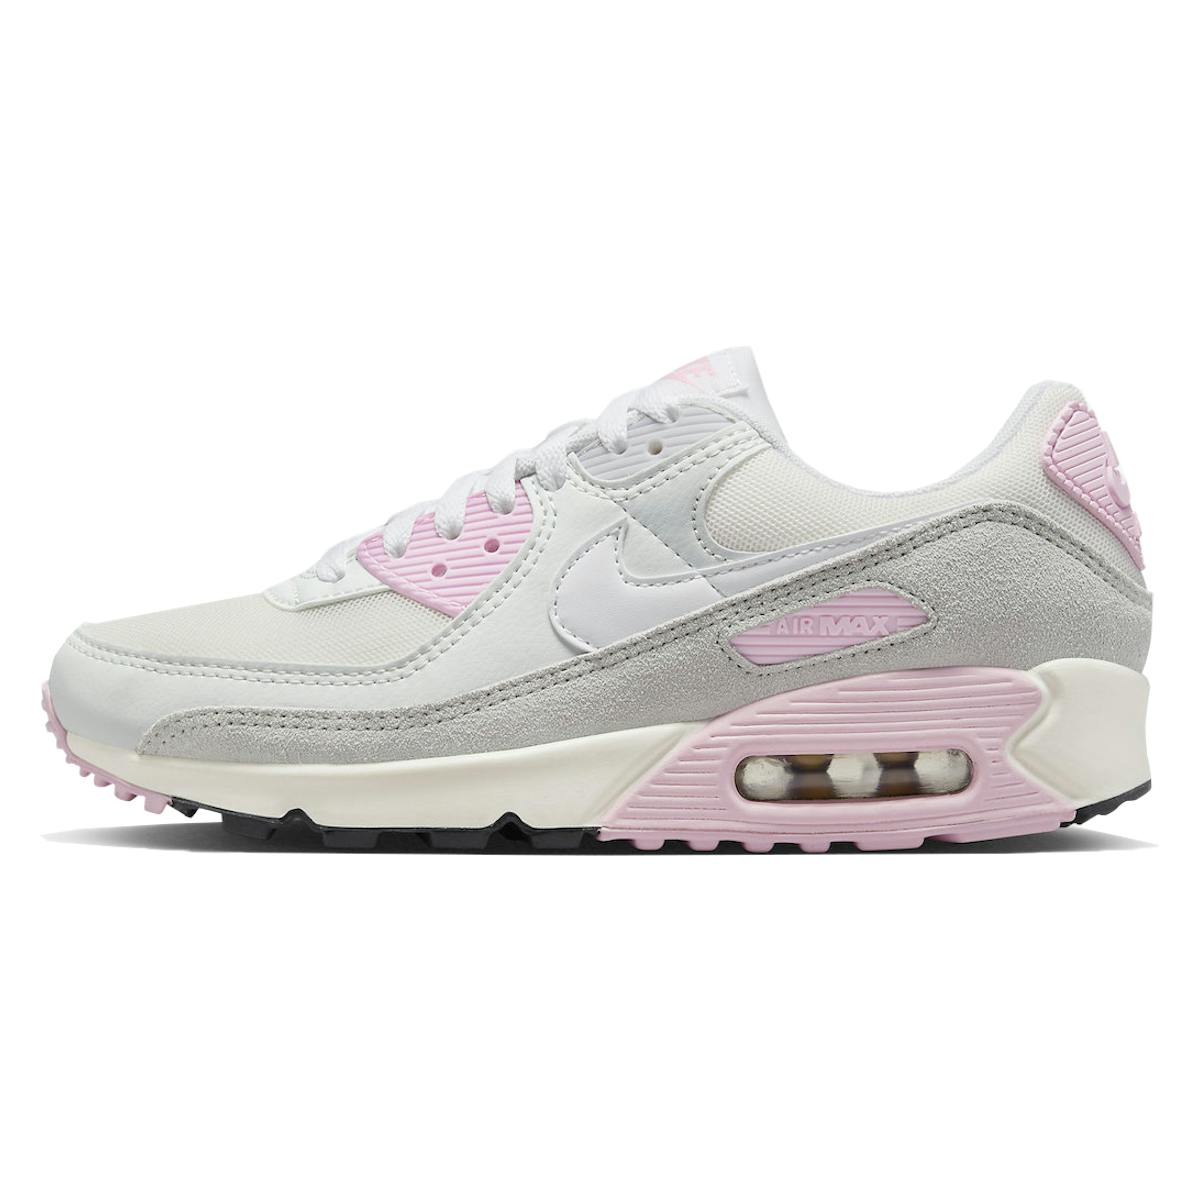 Nike Air Max 90 Wmns "Athletic Department"